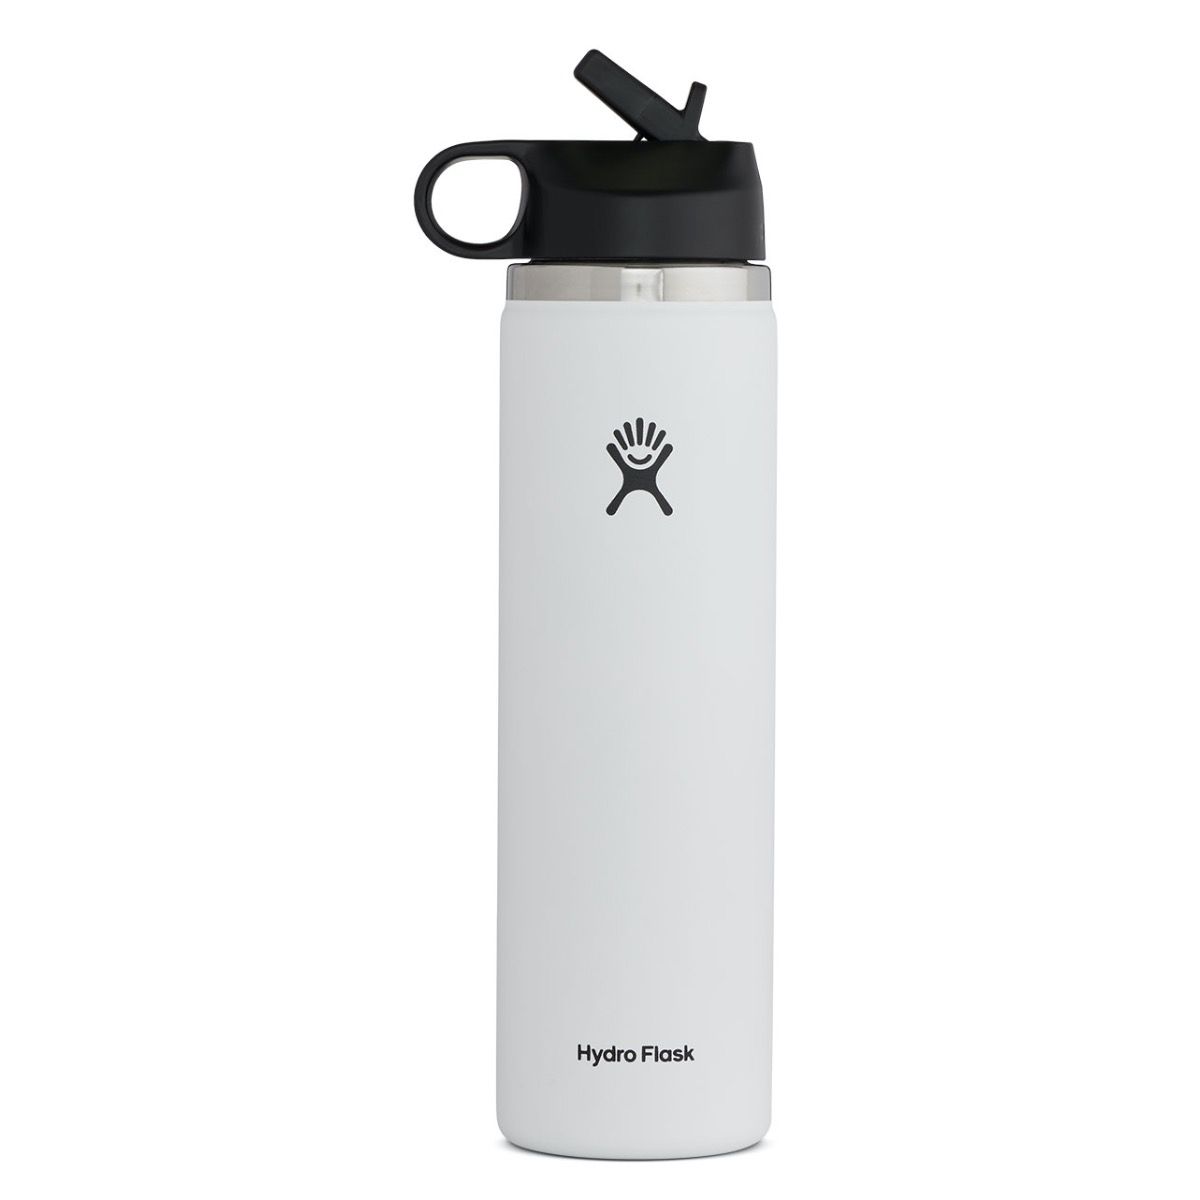 Hydro Flask 24 oz Wide Mouth w/ Straw Lid Accessories Hydro Flask White-110  